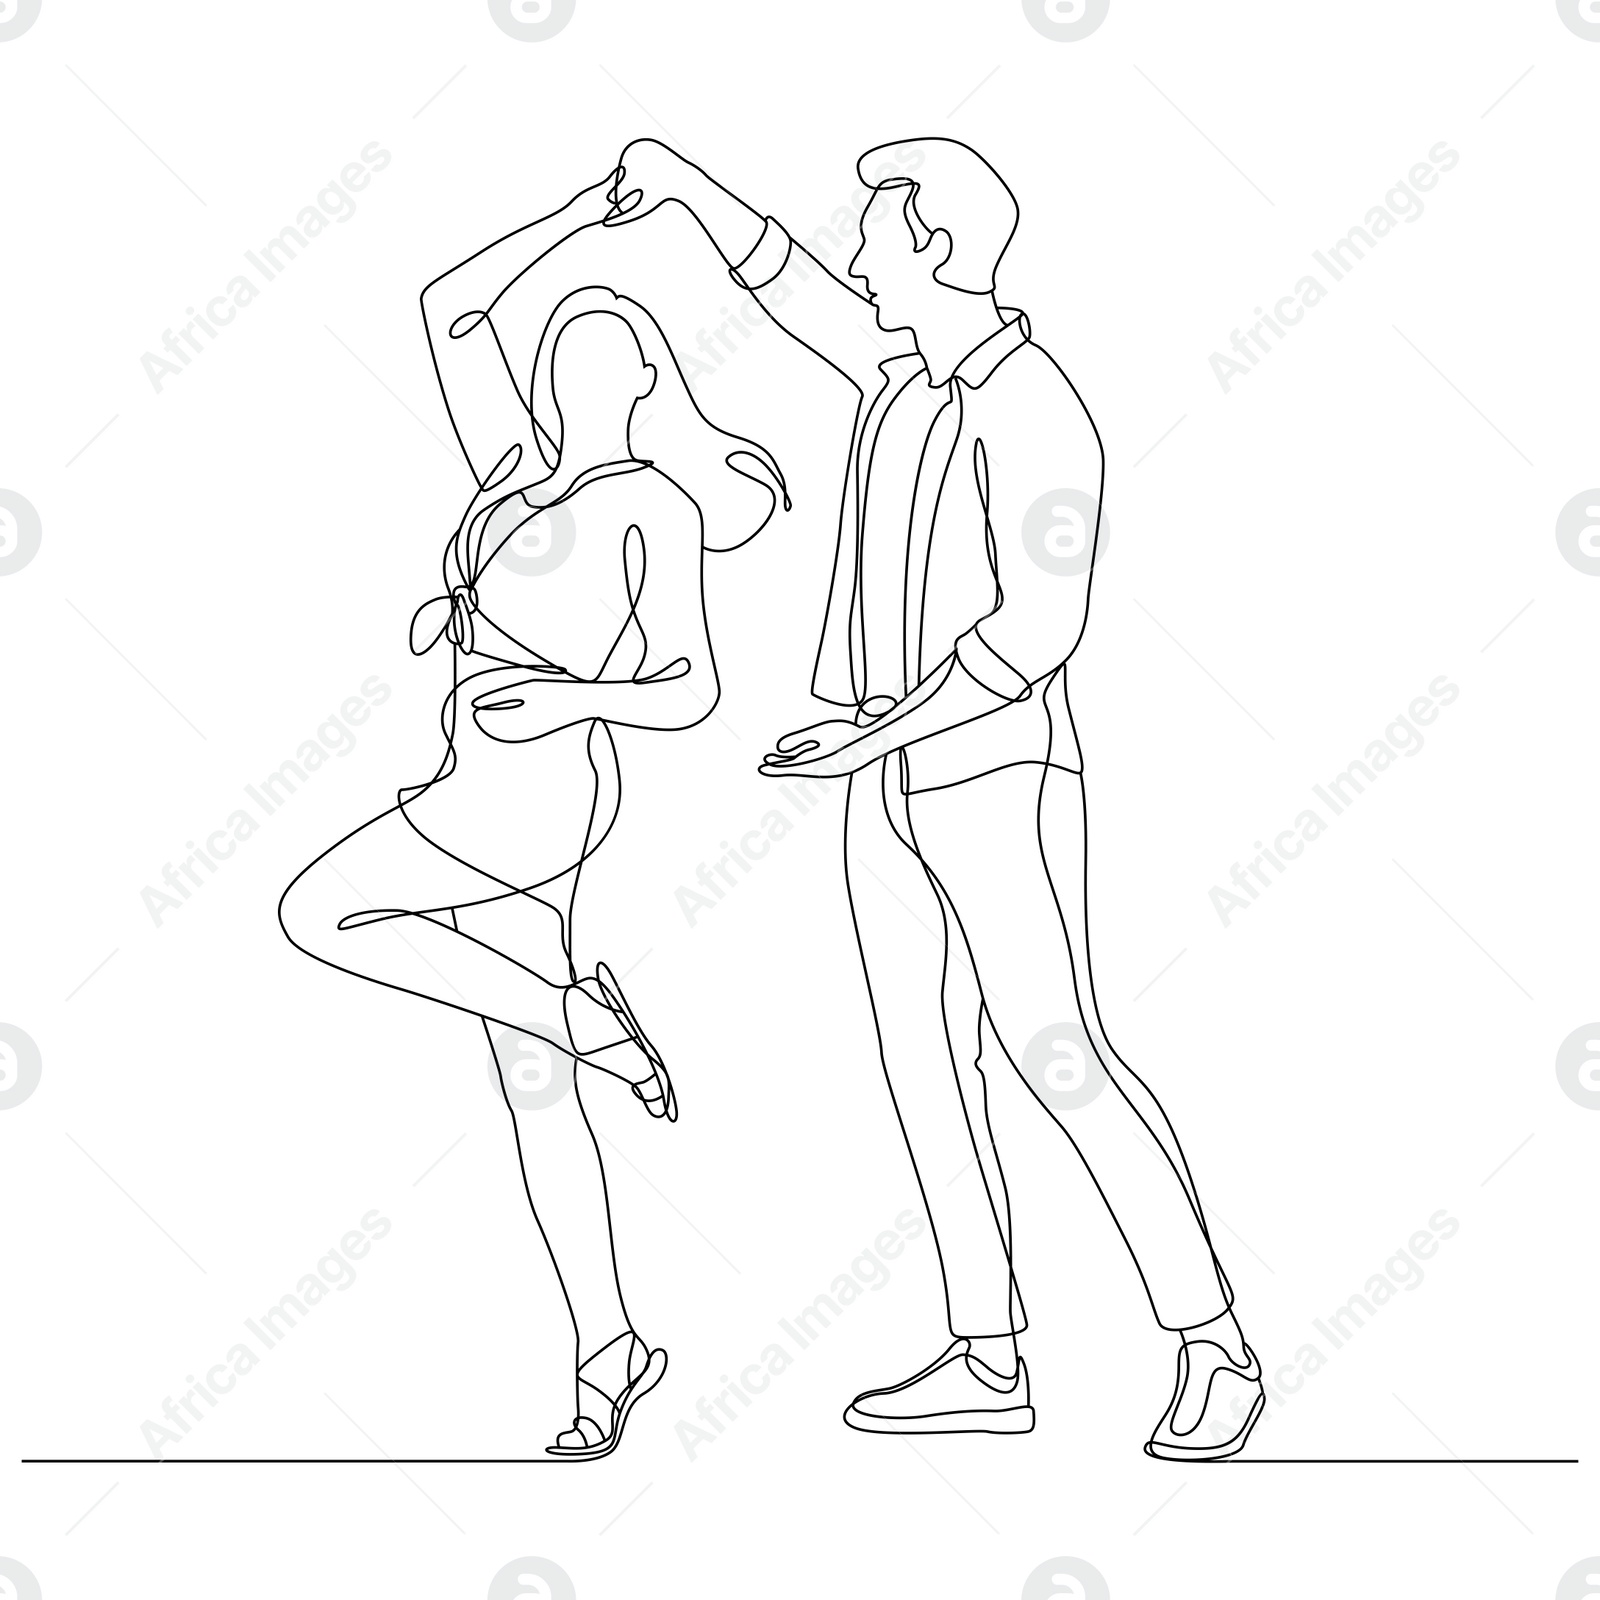 Illustration of Couple dancing, outline on white background